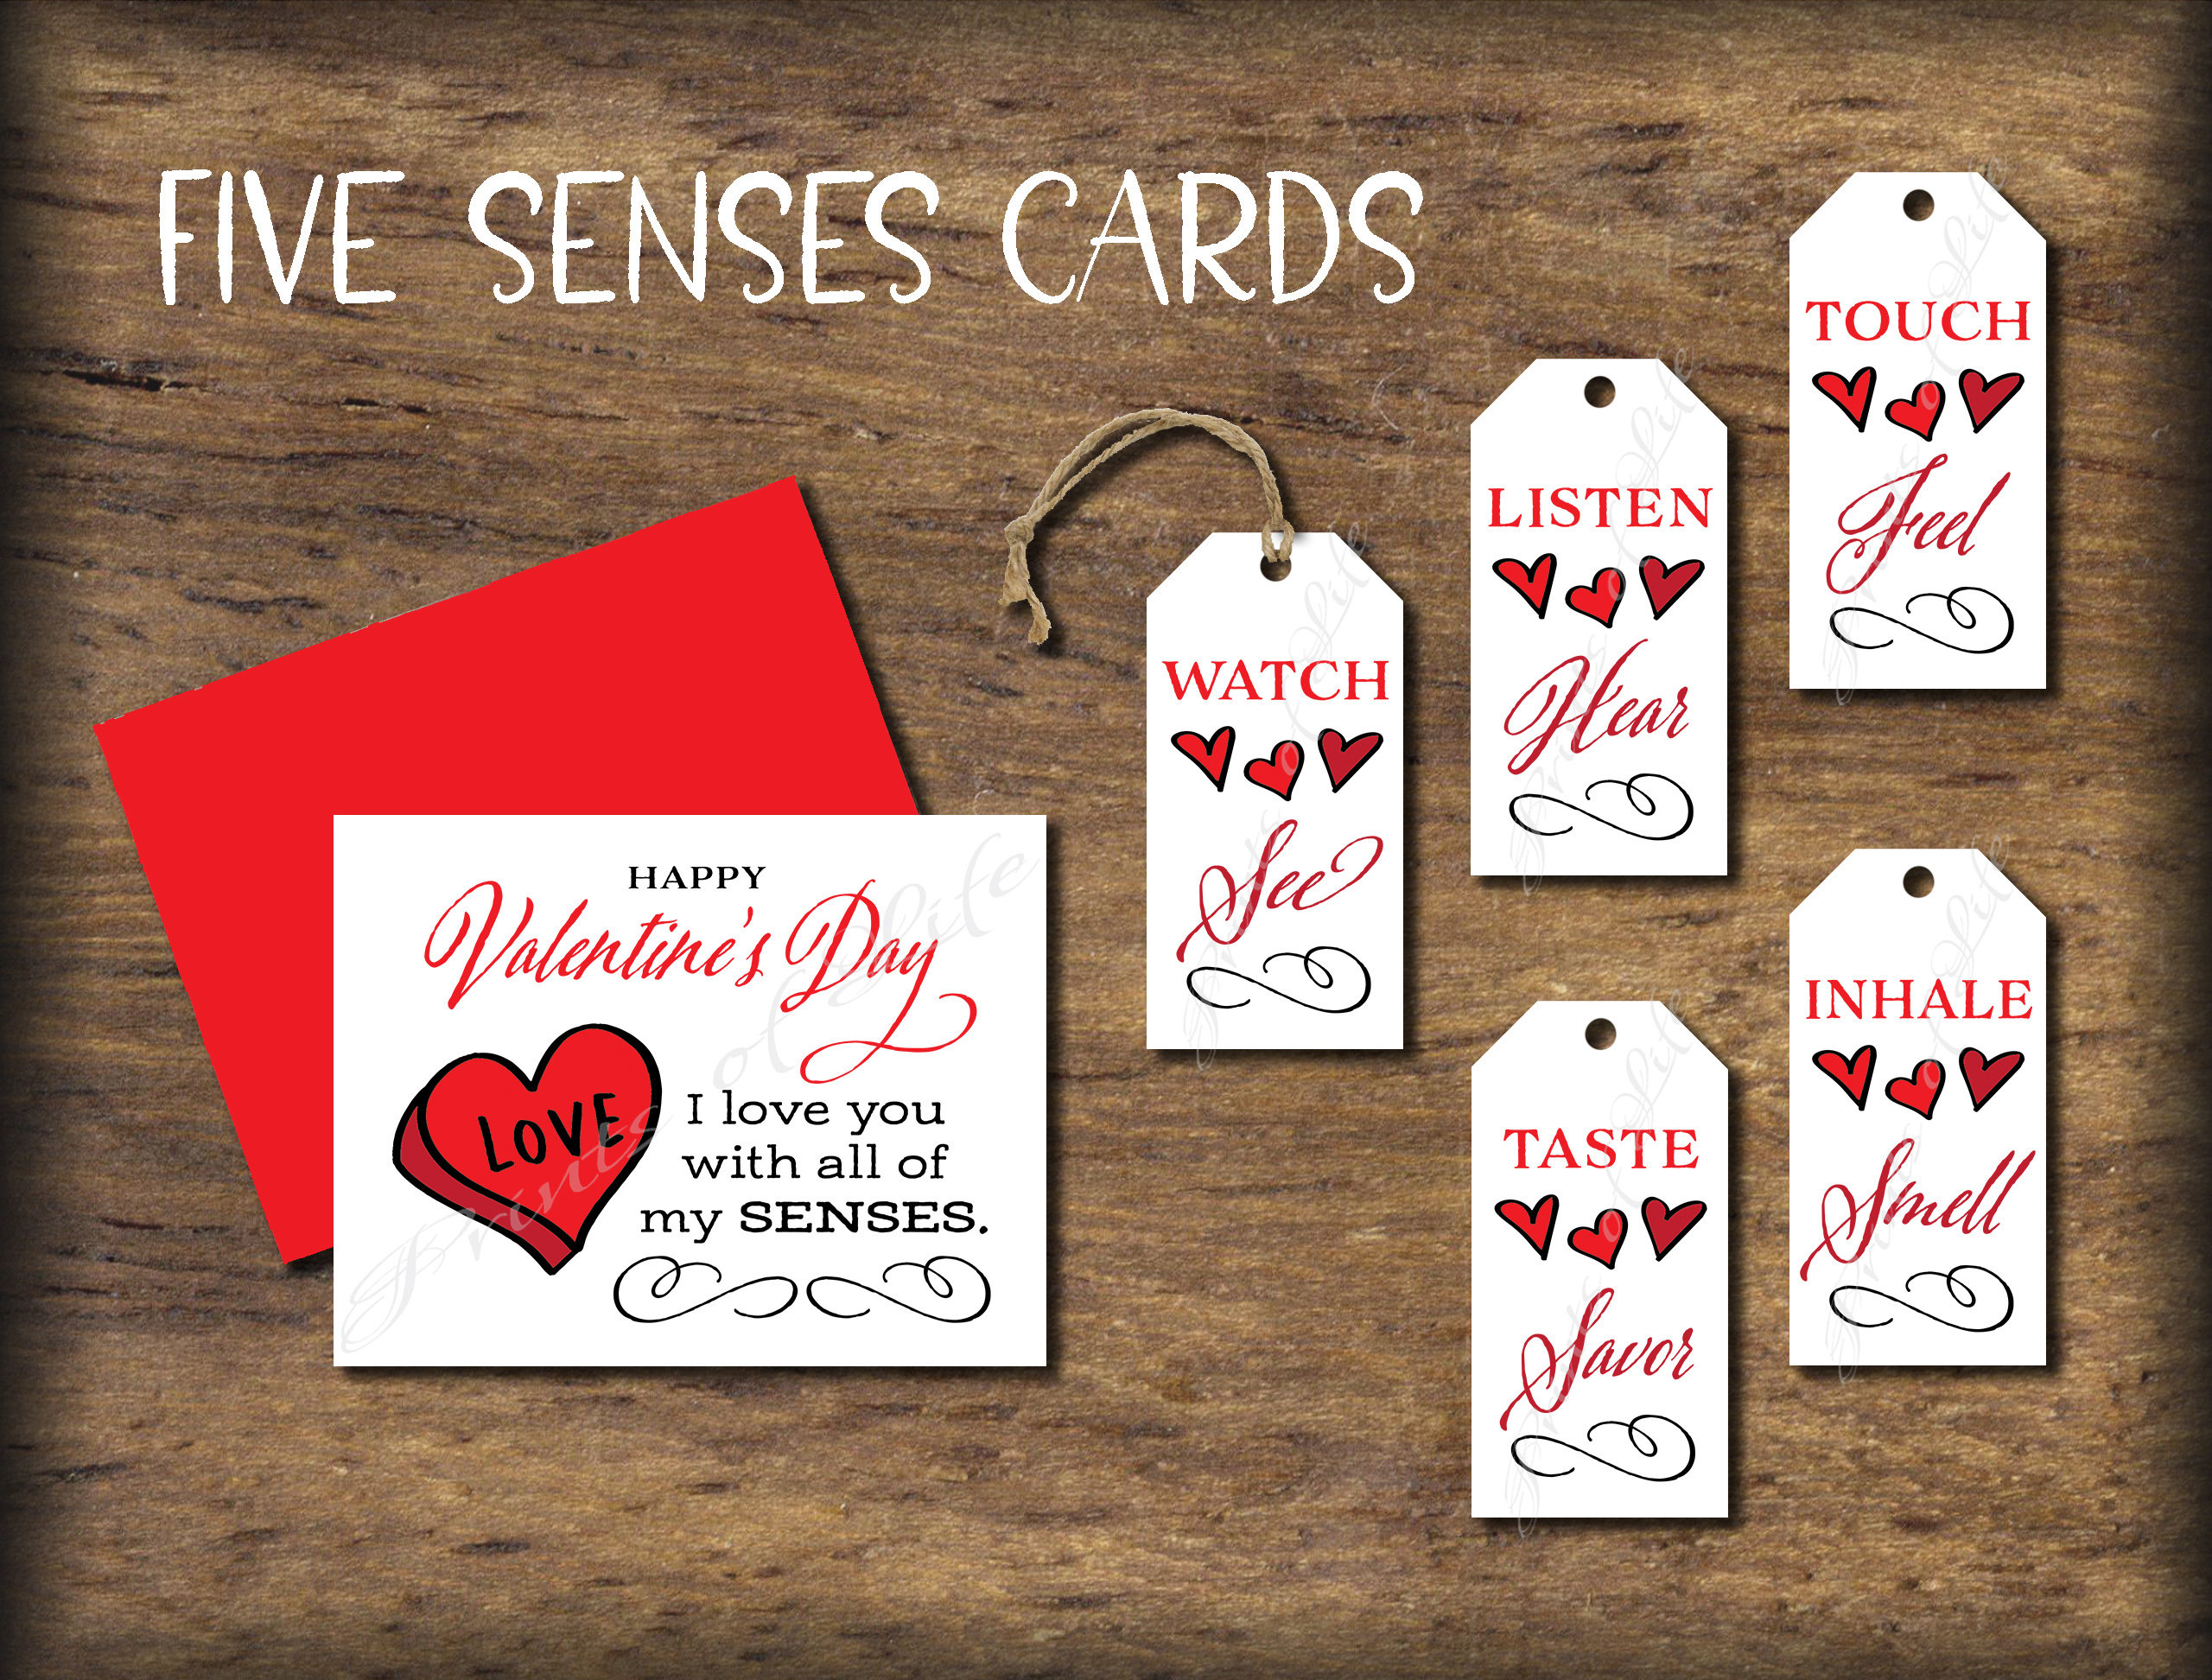 Valentine Tags for the Five Senses Gift Cards